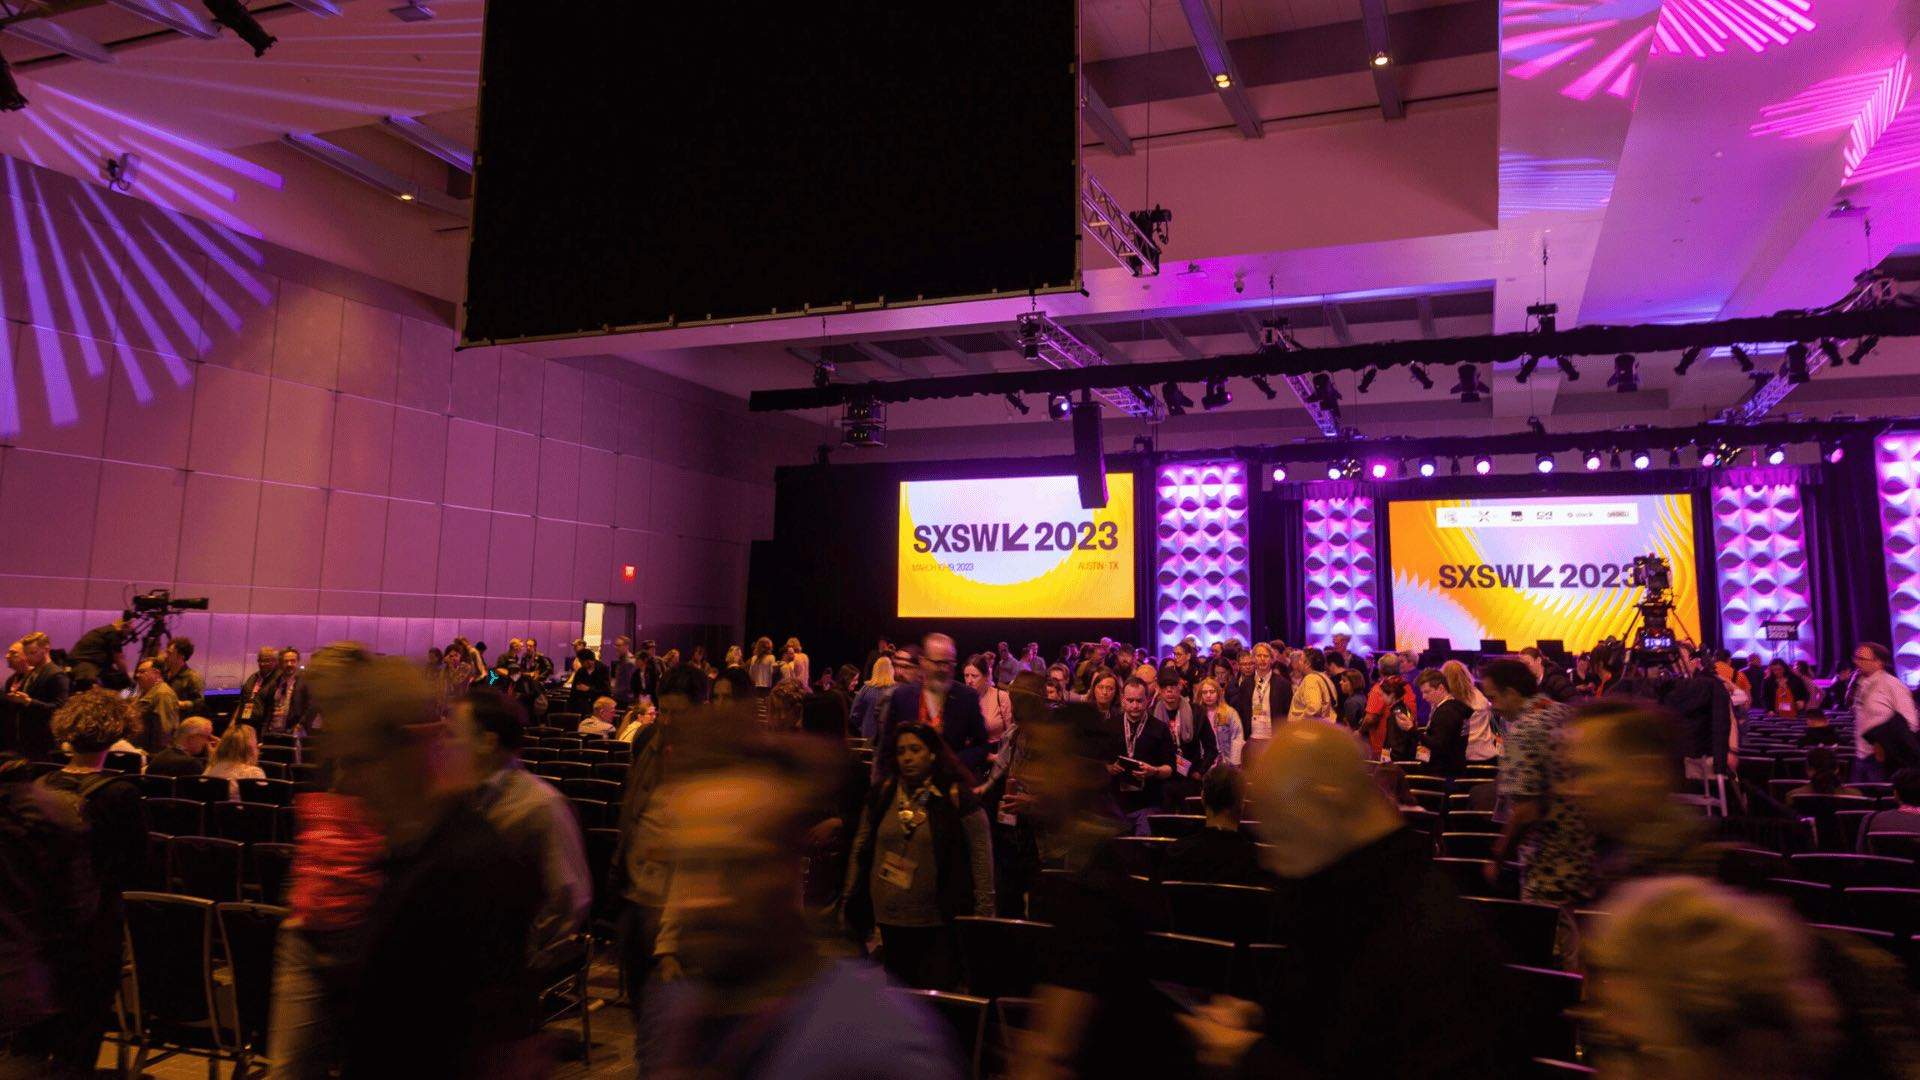 Ten Must-Catch Talks and Panels That You Don't Want to Miss at the Inaugural SXSW Sydney